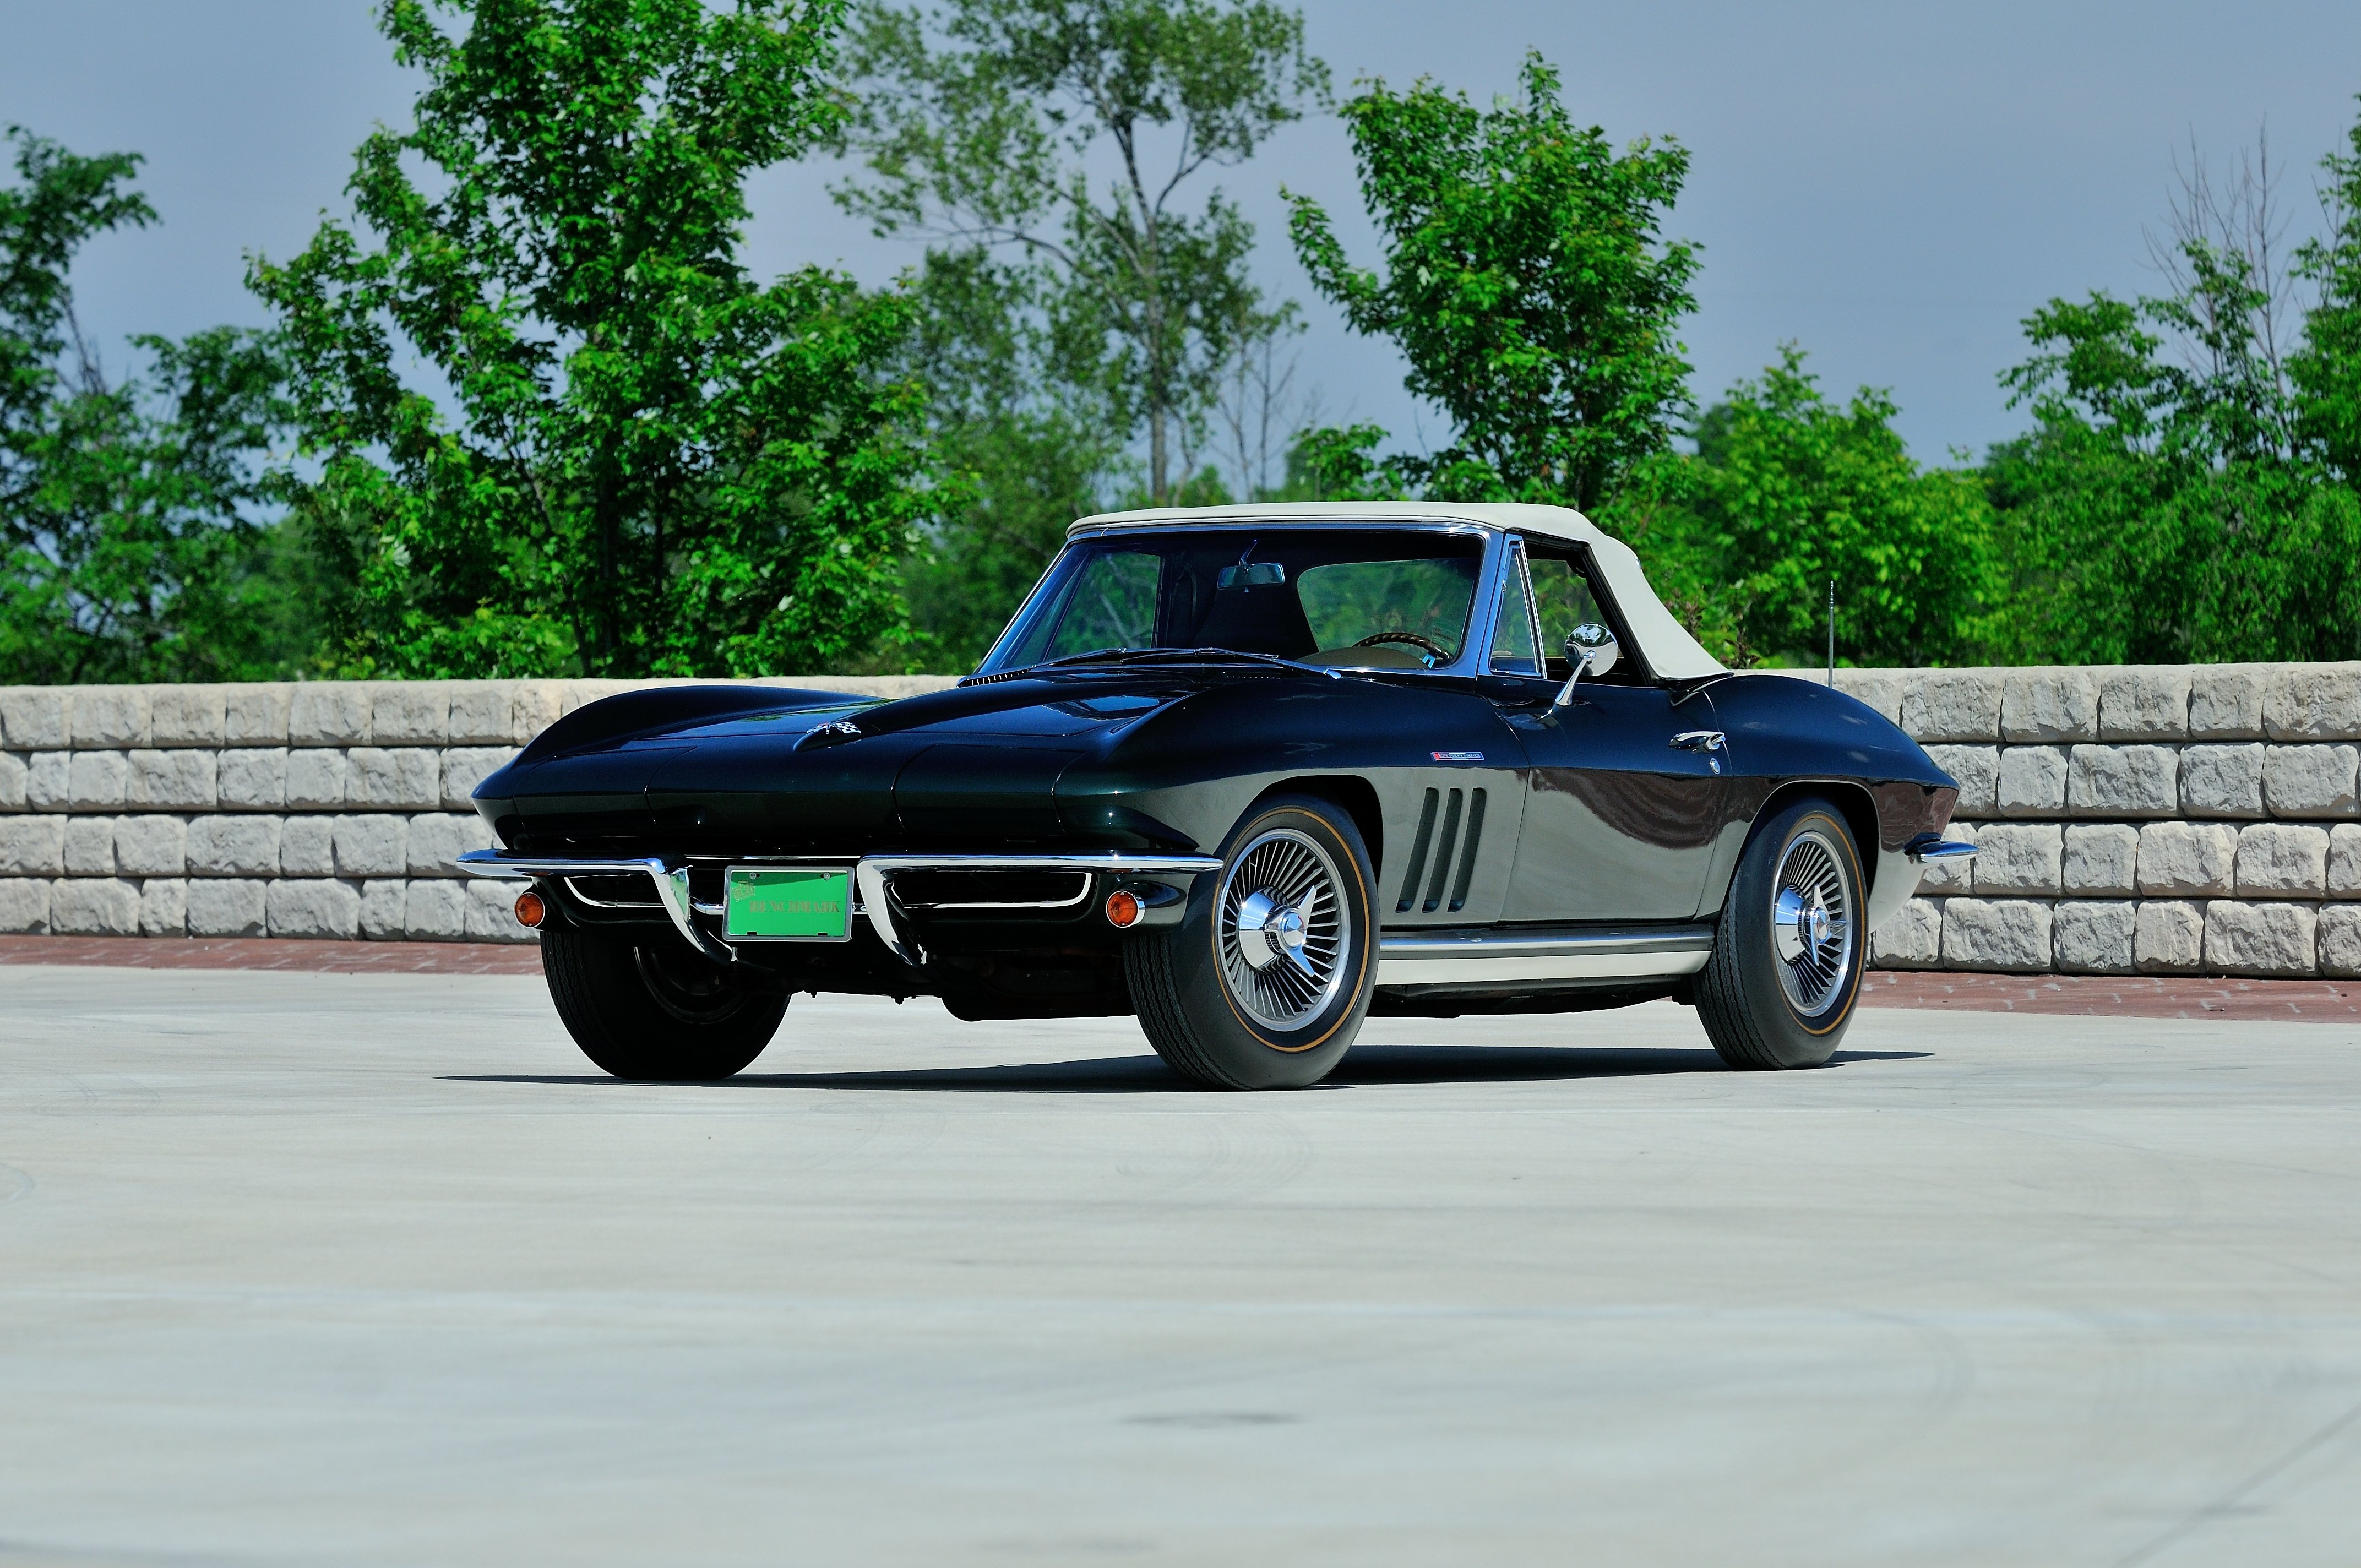 1965, Chevrolet, Corvette, Stingray, Ating, Ray, Muscle, Convertible, Classic, Old, Original, Usa,  01 Wallpaper